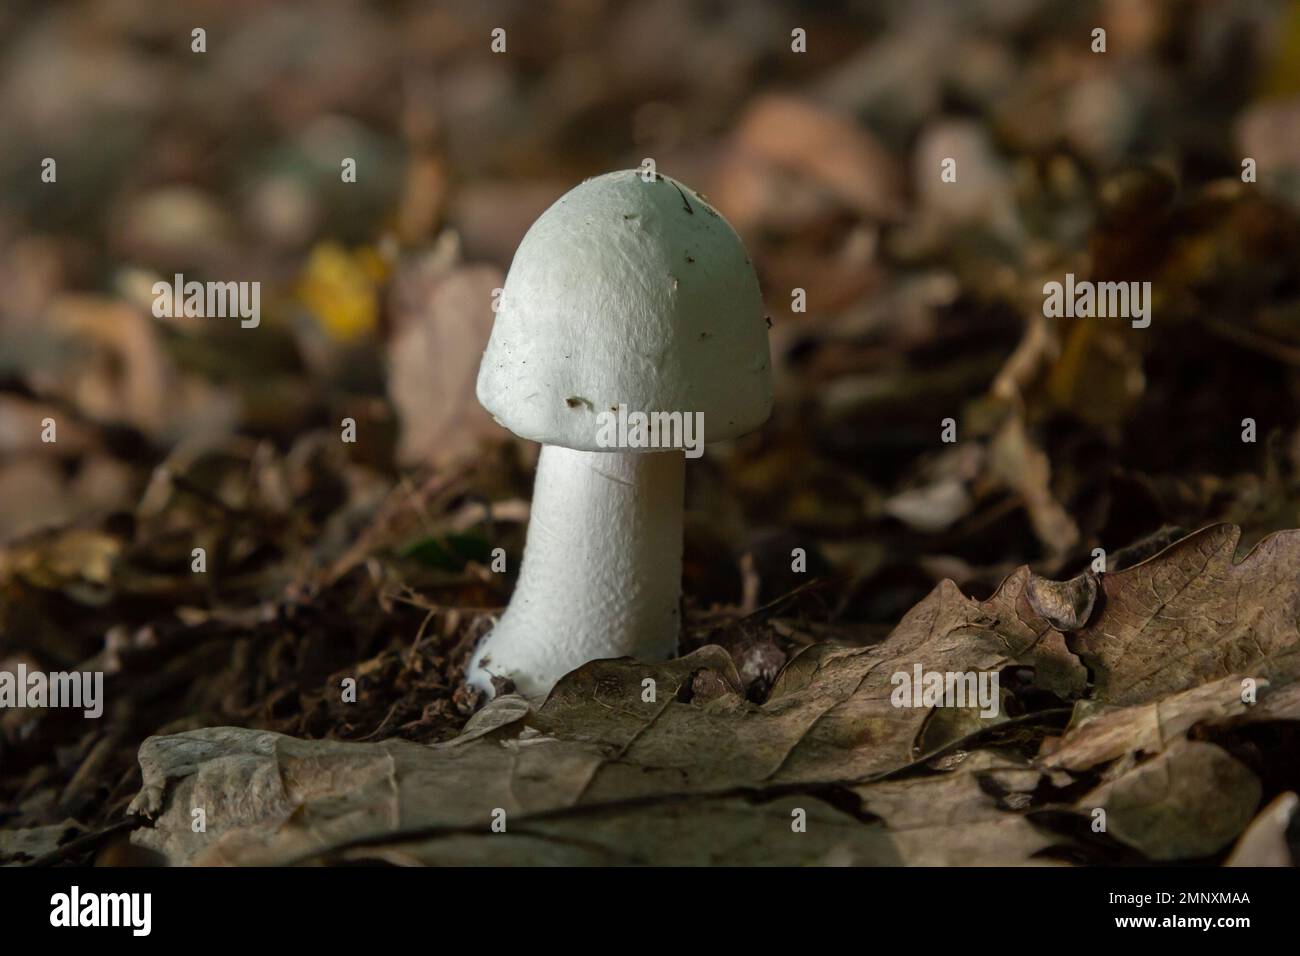 White deadly poisonous fungi Amanita virosa also known as destroying angel. Young egg-shaped fruiting bodies showing conical caps, veil around stem. M Stock Photo